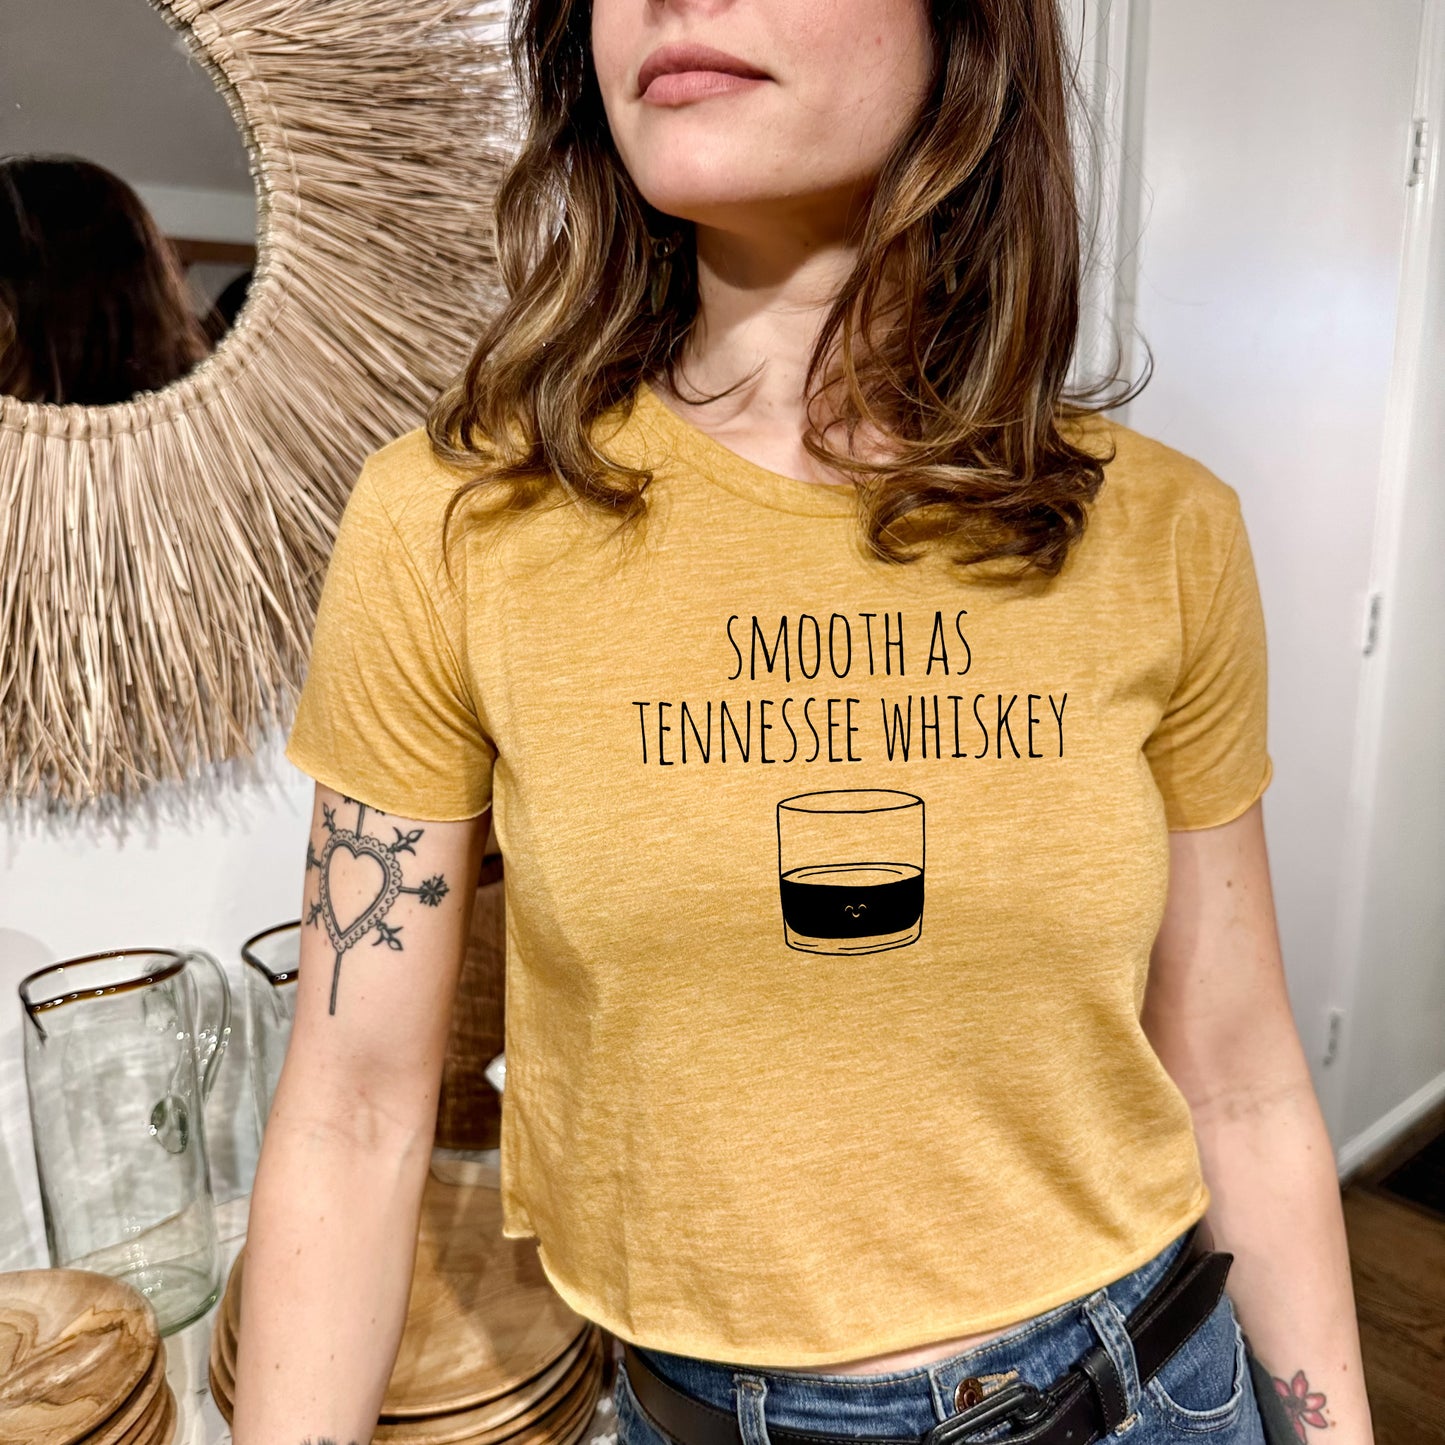 Smooth as Tennessee Whiskey - Women's Crop Tee - Heather Gray or Gold